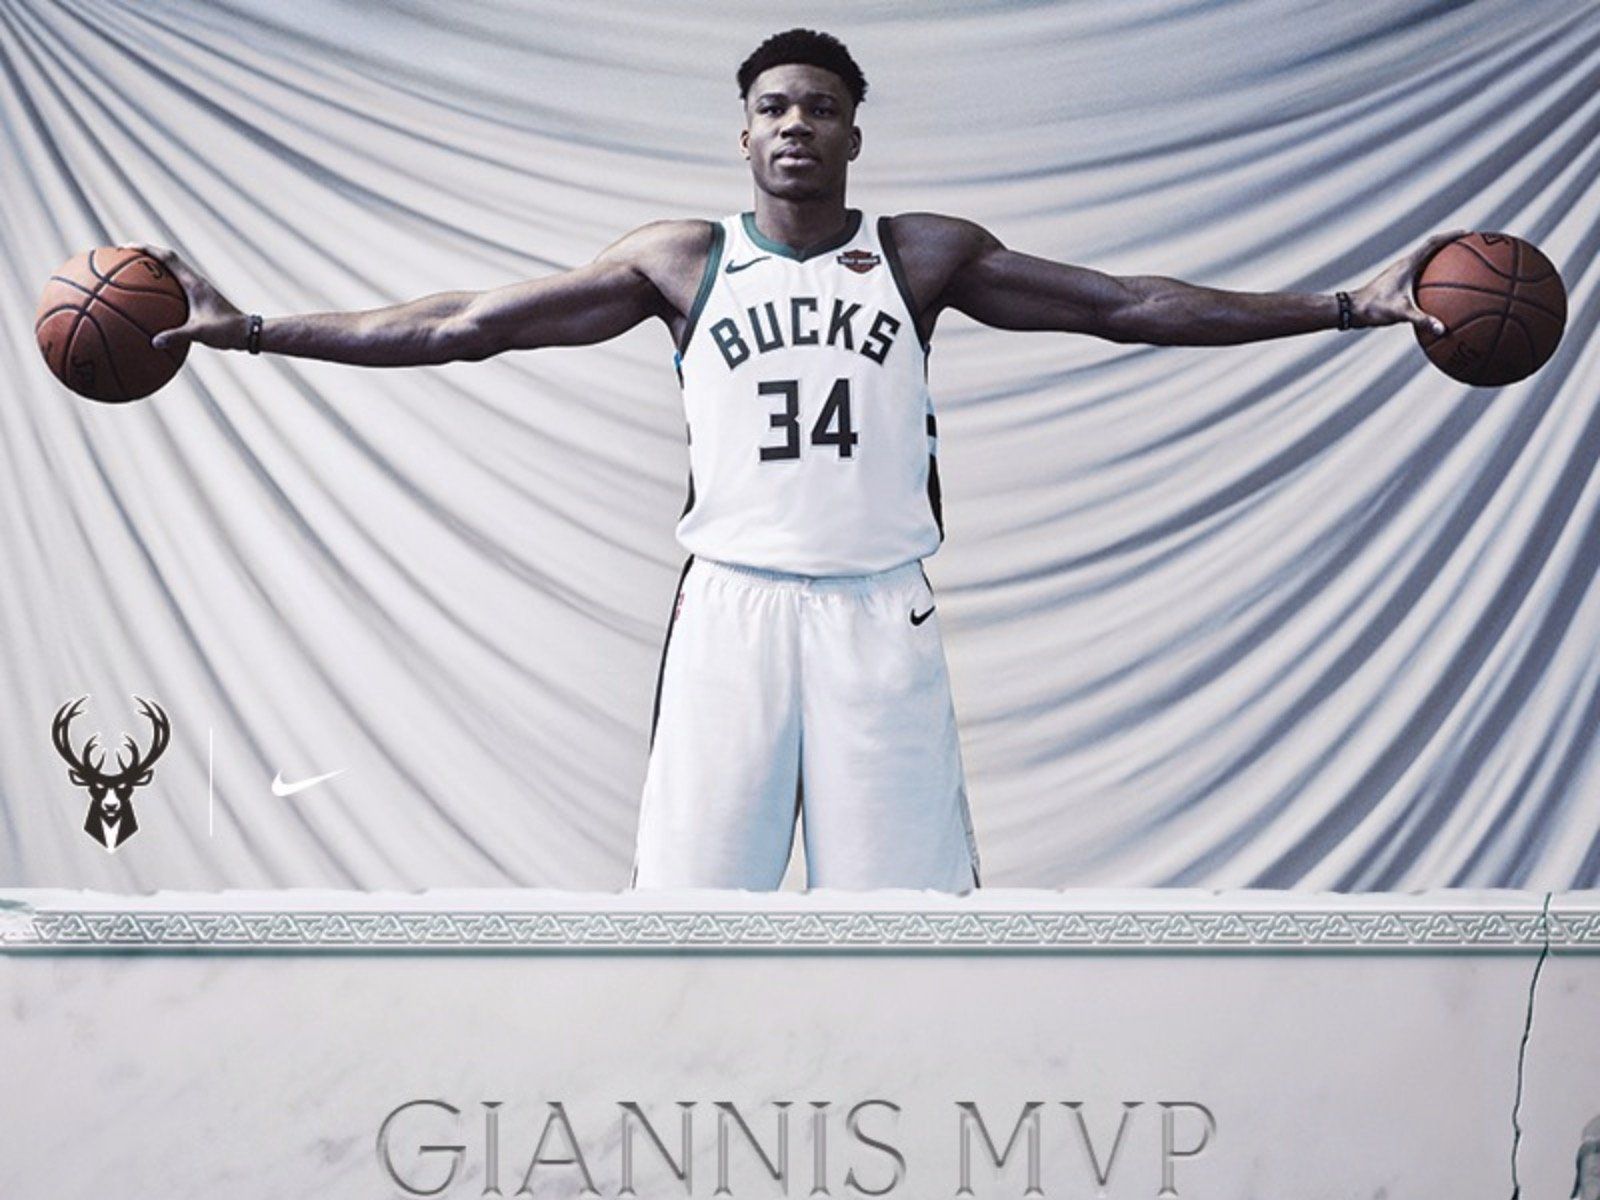 You're invited to Giannis' MVP celebration at Fiserv Forum on July 14